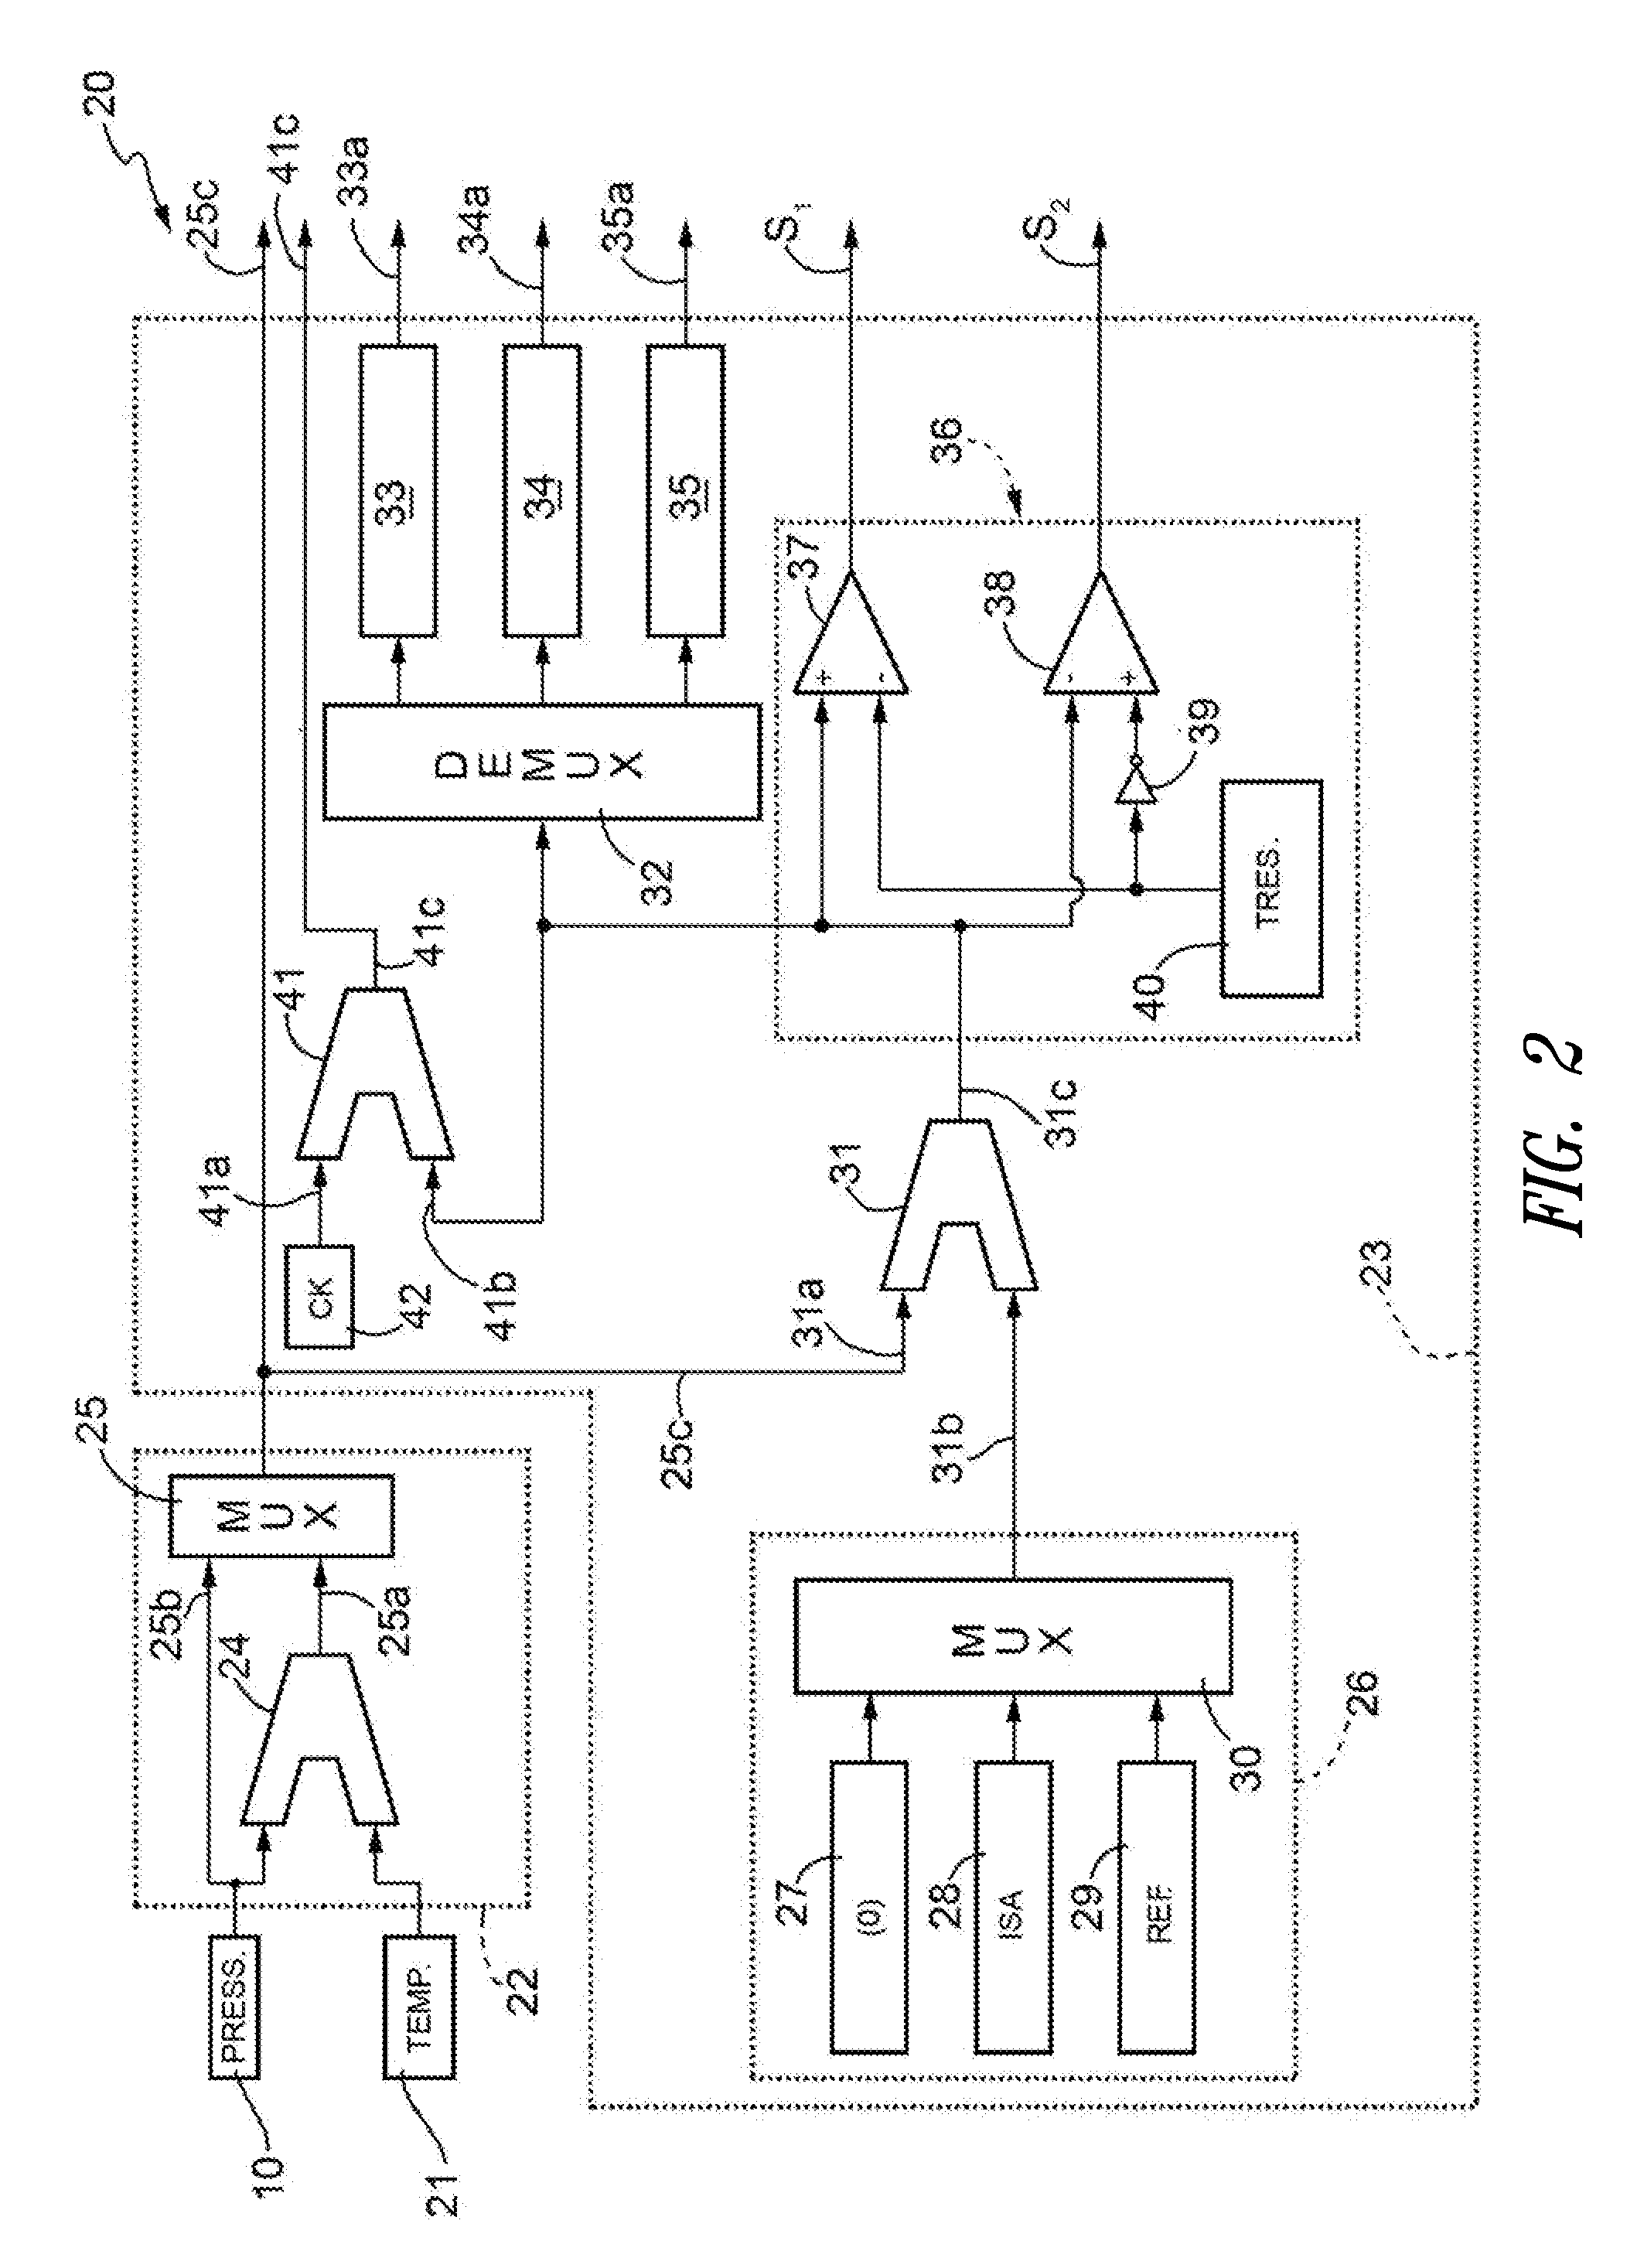 Barometric-pressure-sensor device with altimeter function and altimeter-setting function